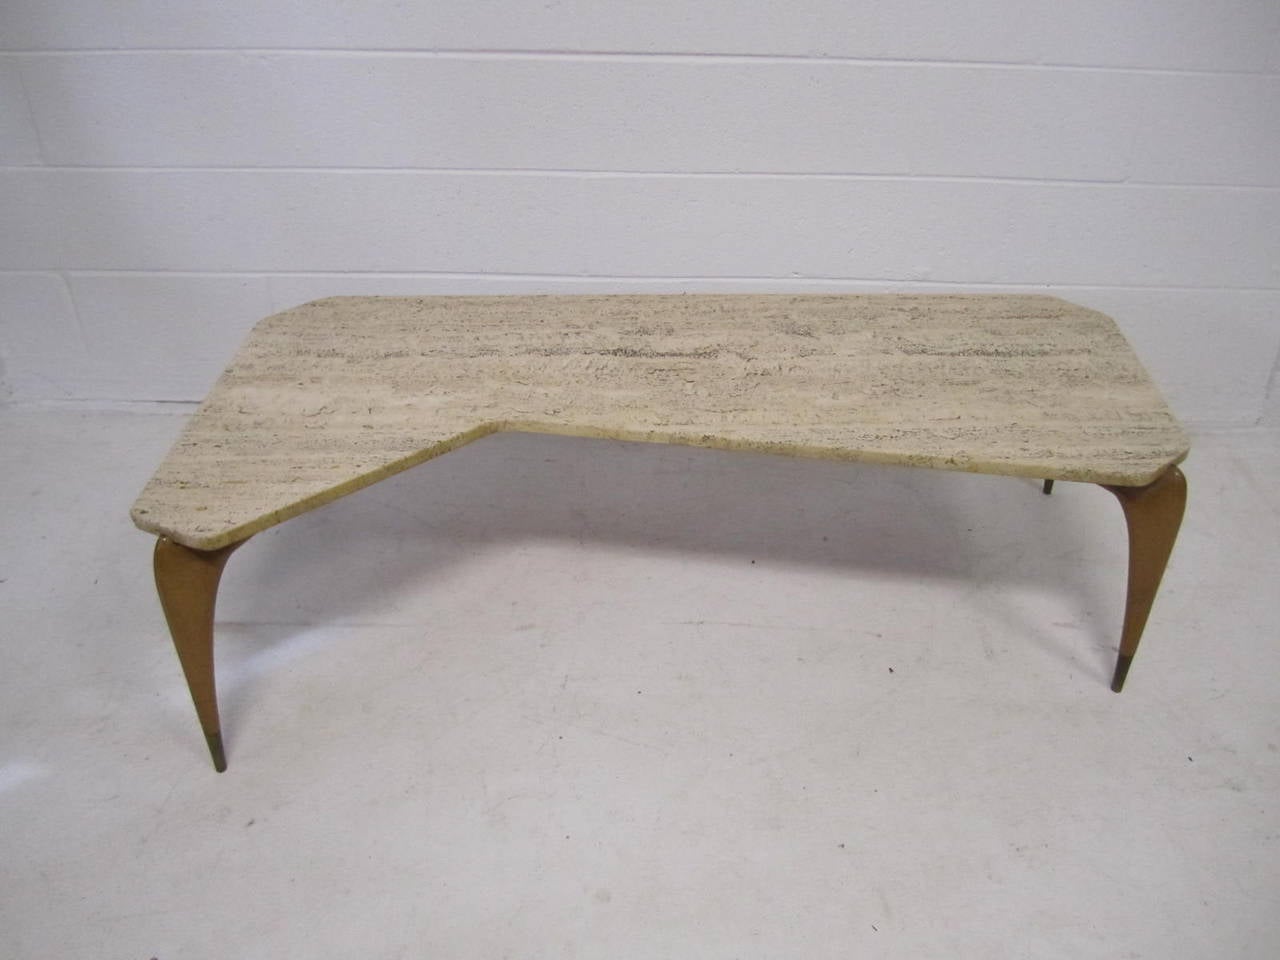 Sensational Gio Ponti style boomerang shaped travertine coffee table. Sensuous sexy light wood legs support a super organic textured travertine top. The wonderfully carved legs are capped with a handsome brass sabot. This coffee table is truly